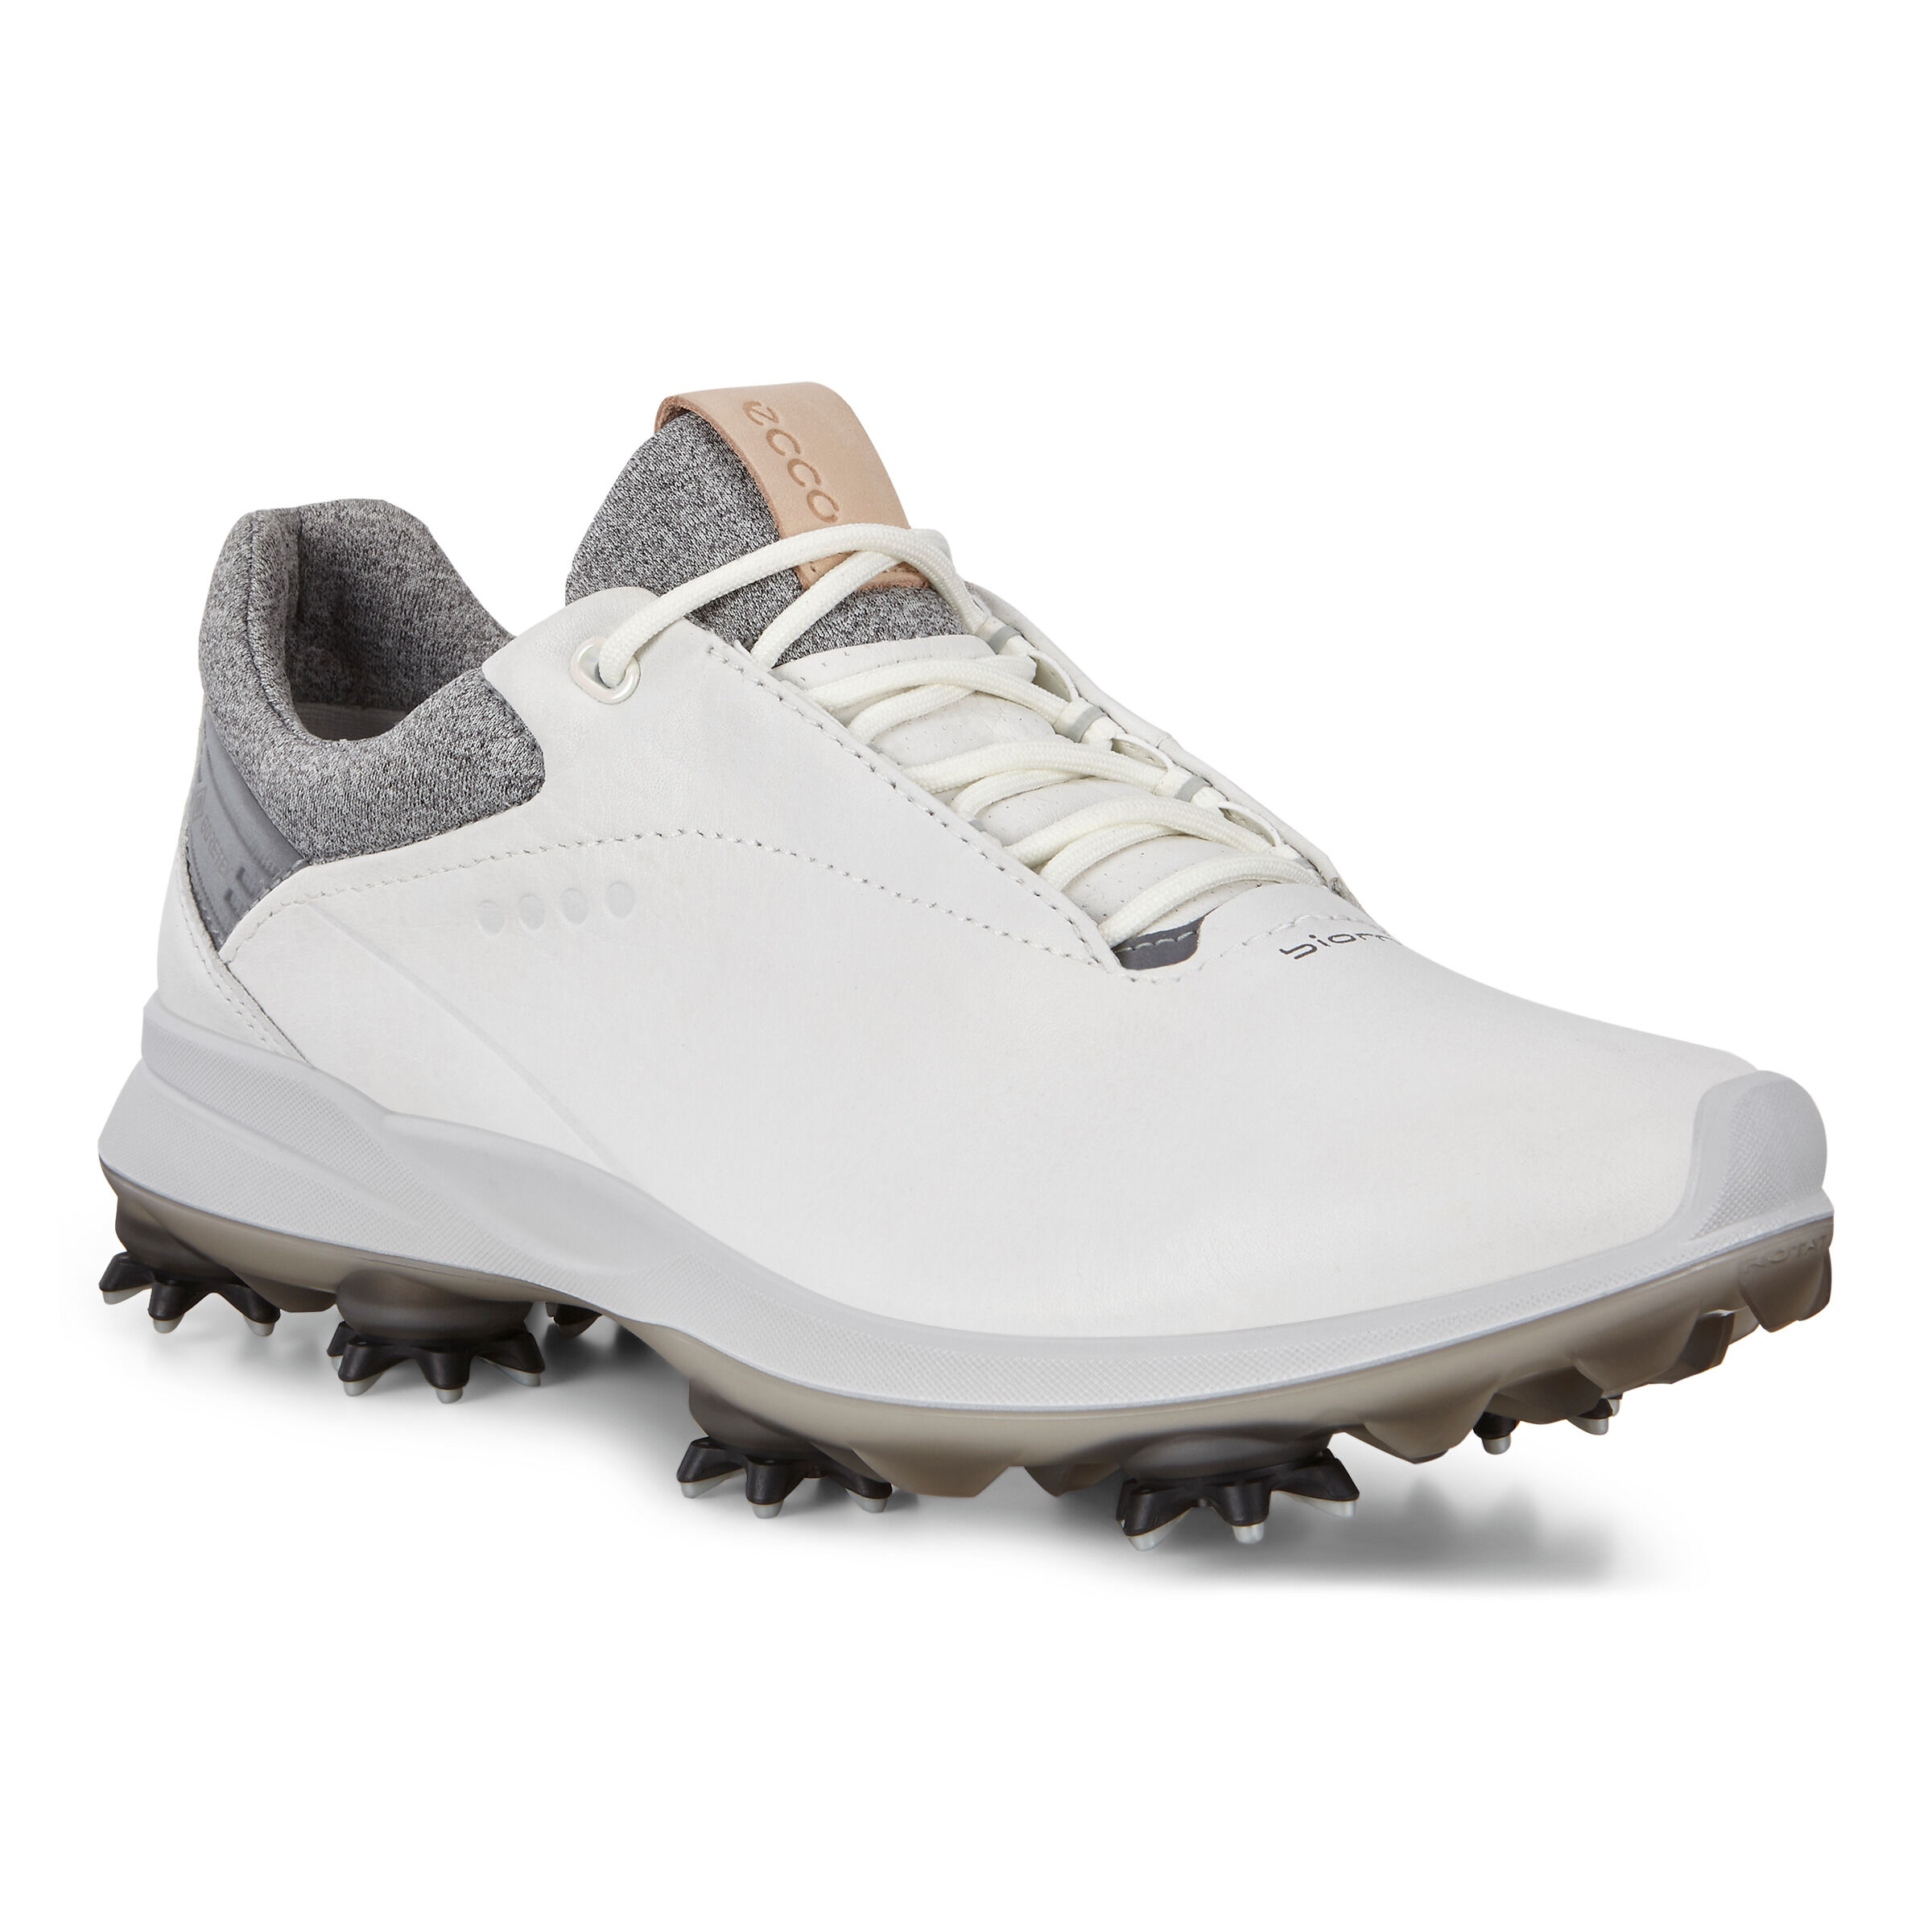 size 8.5 ecco womens golf shoes